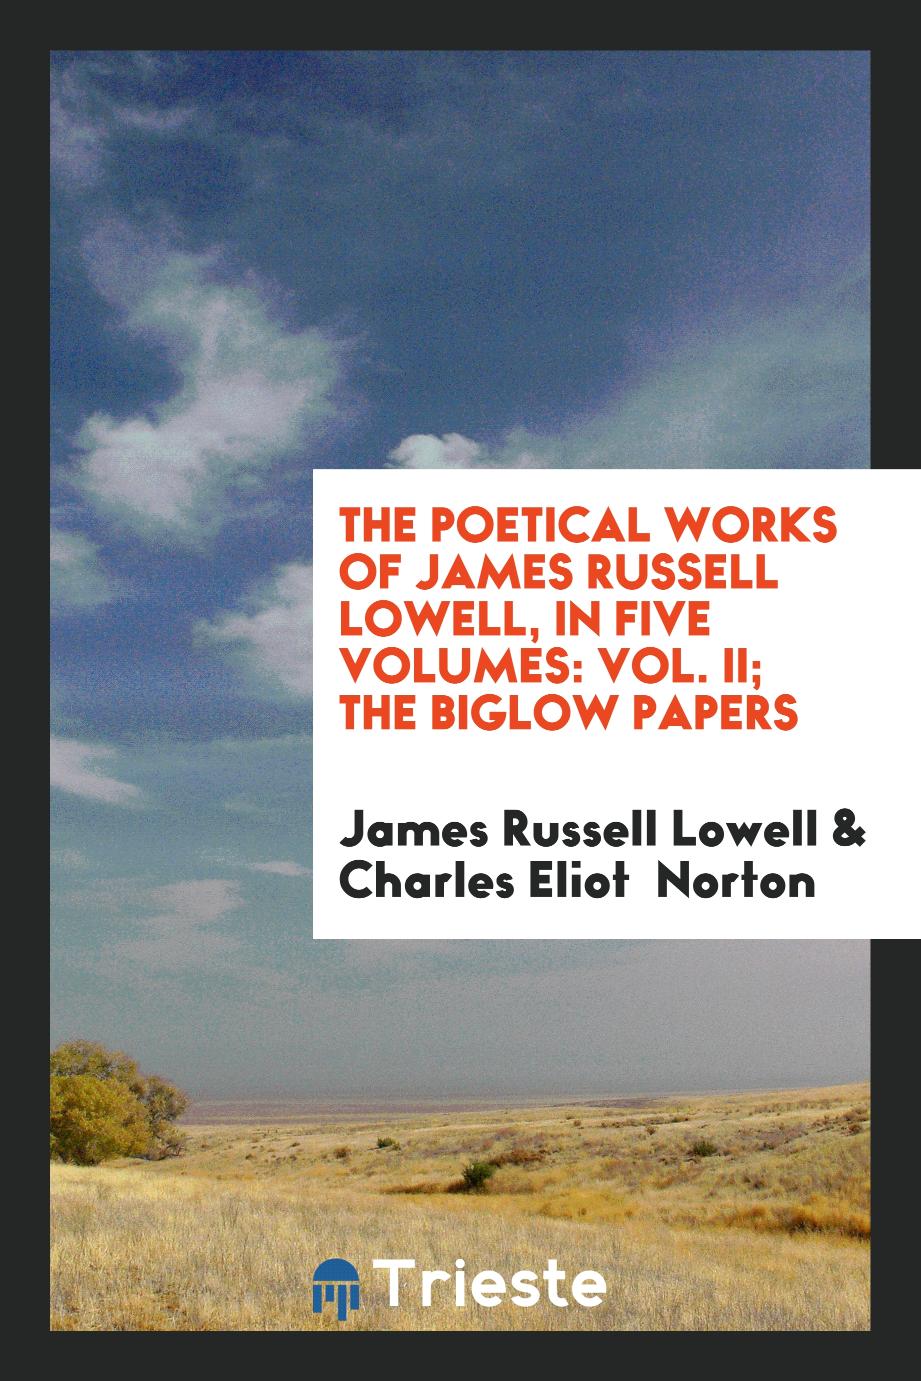 The Poetical Works of James Russell Lowell, in Five Volumes: Vol. II; The Biglow Papers